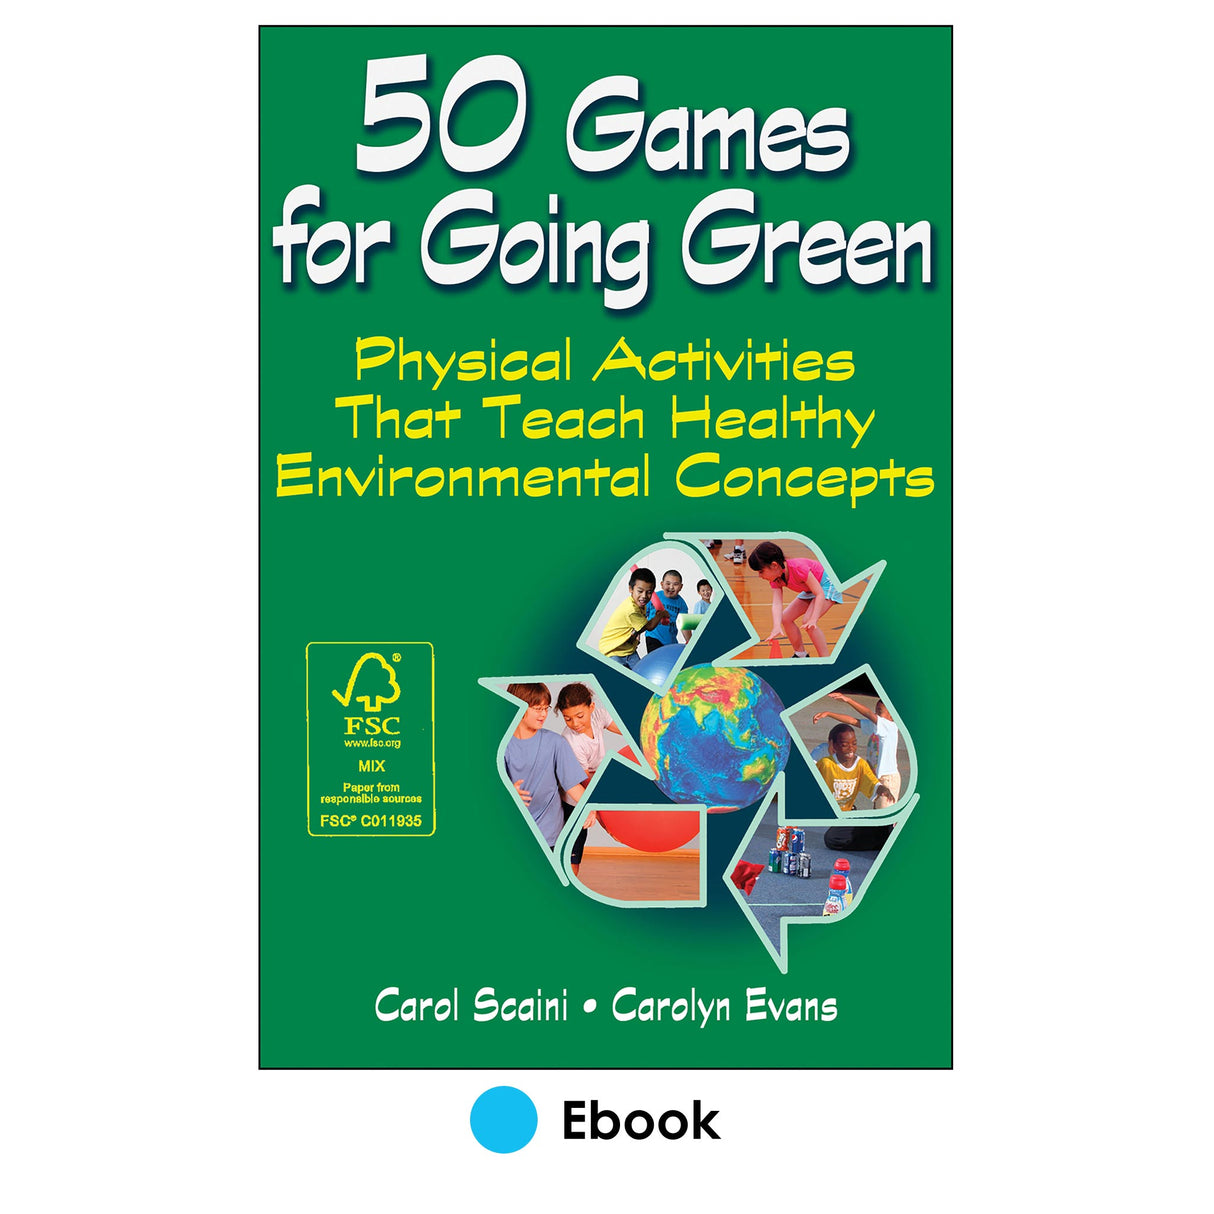 50 Games for Going Green PDF